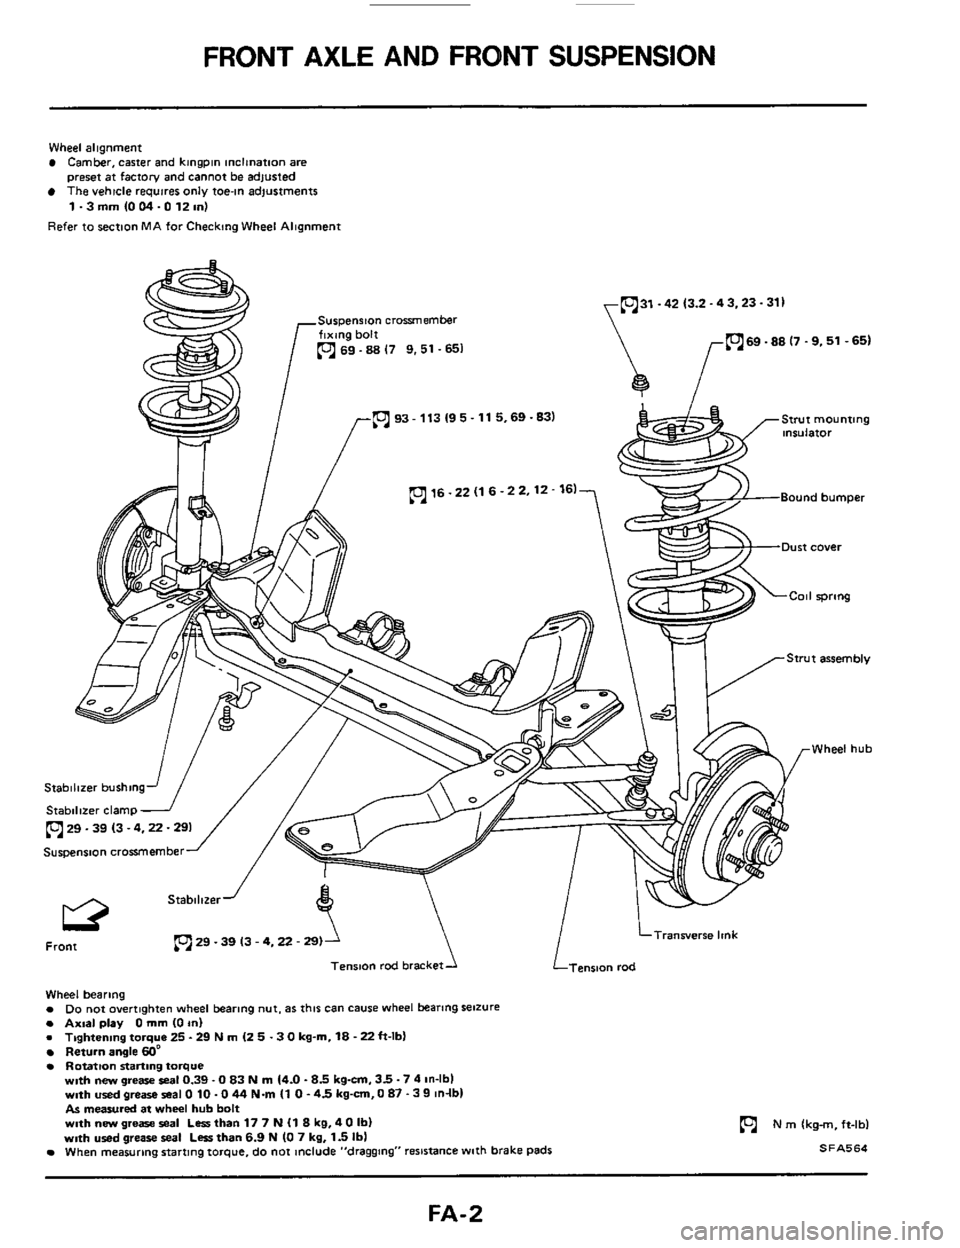 NISSAN 300ZX 1984 Z31 Front Suspension Workshop Manual FRONT AXLE AND FRONT SUSPENSION 
Wheel  alignment Camber,  caster  and kingpin  inclination are preset at factory and cannot  be adjusted The  vehicle  requires only toe-in adjustments 
1-3 mm (0 04 -